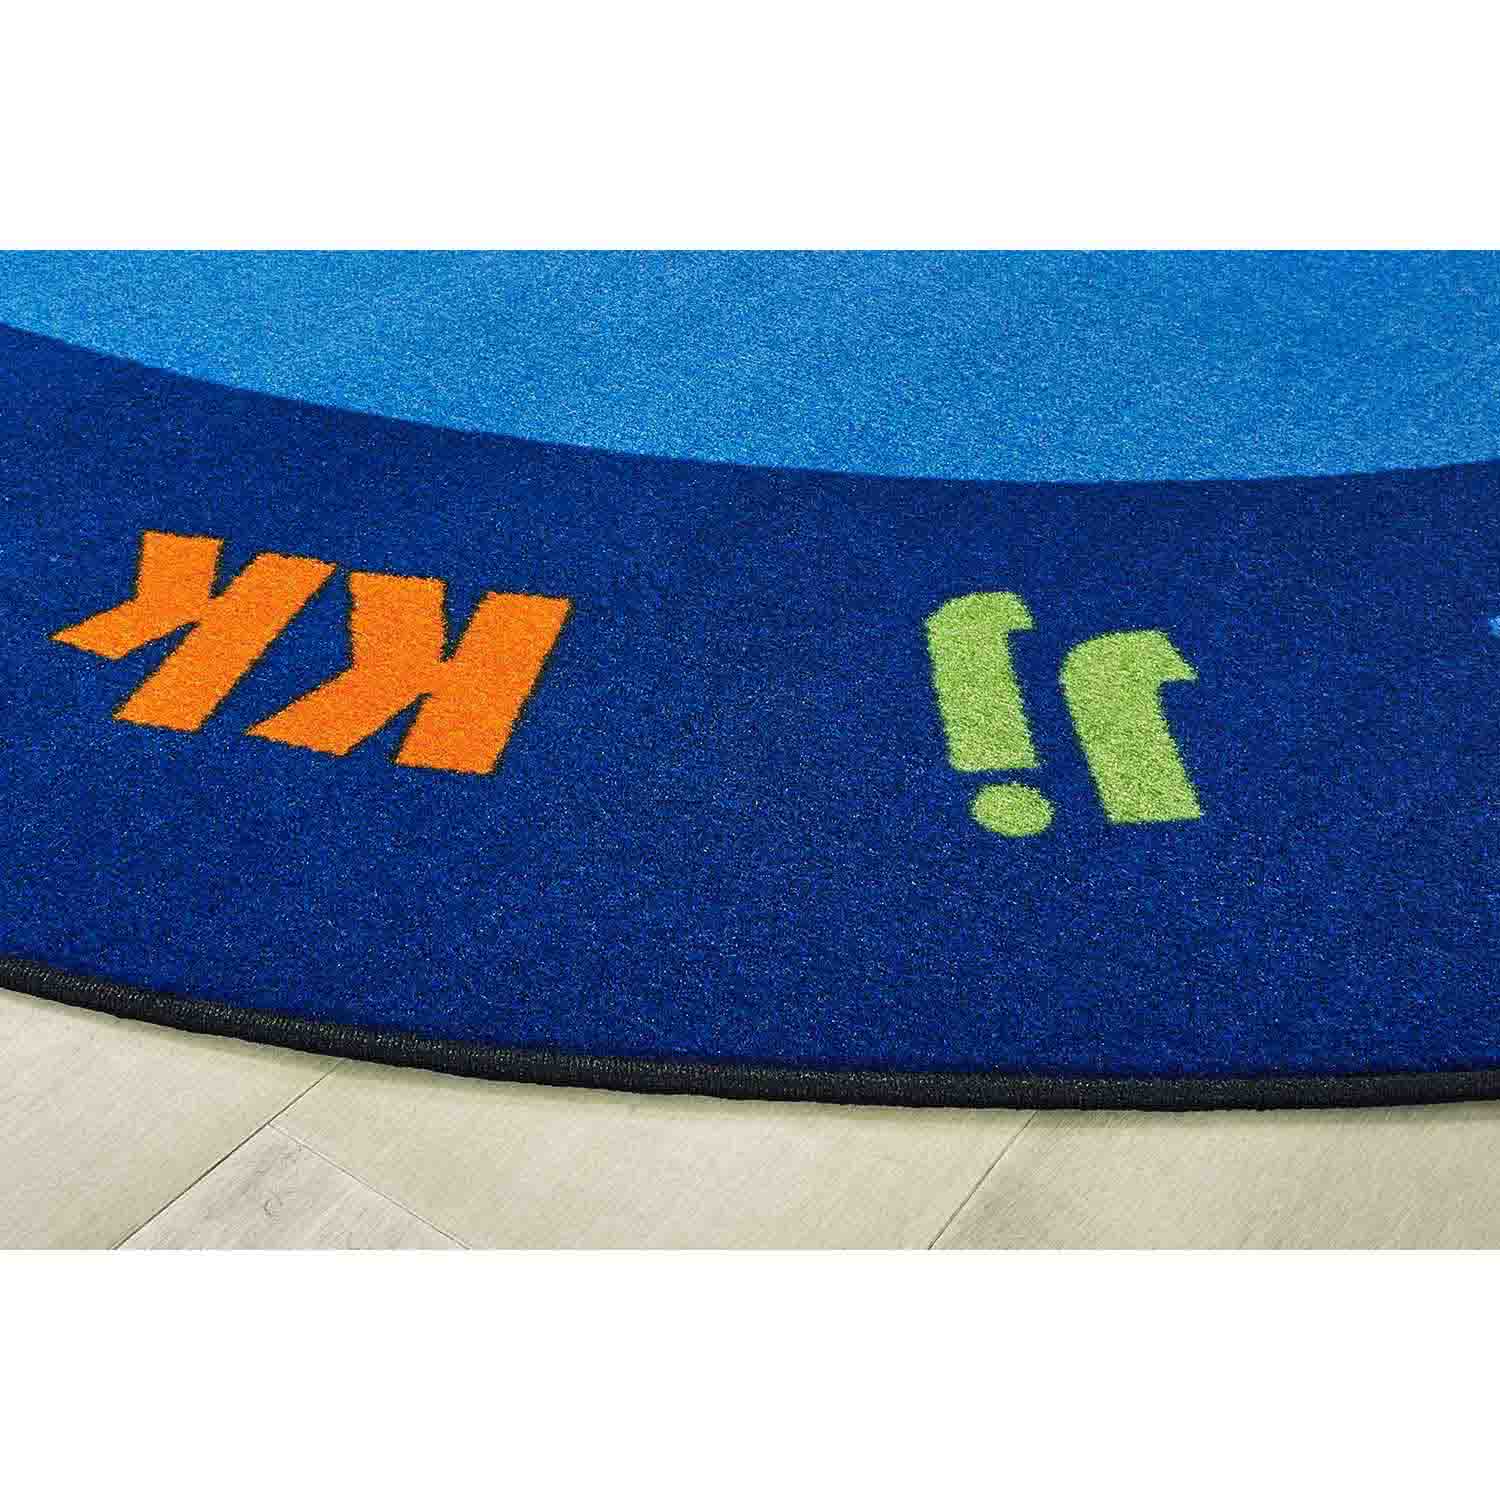 KID$ Value Plus Classroom Rug, Circletime Early Learning